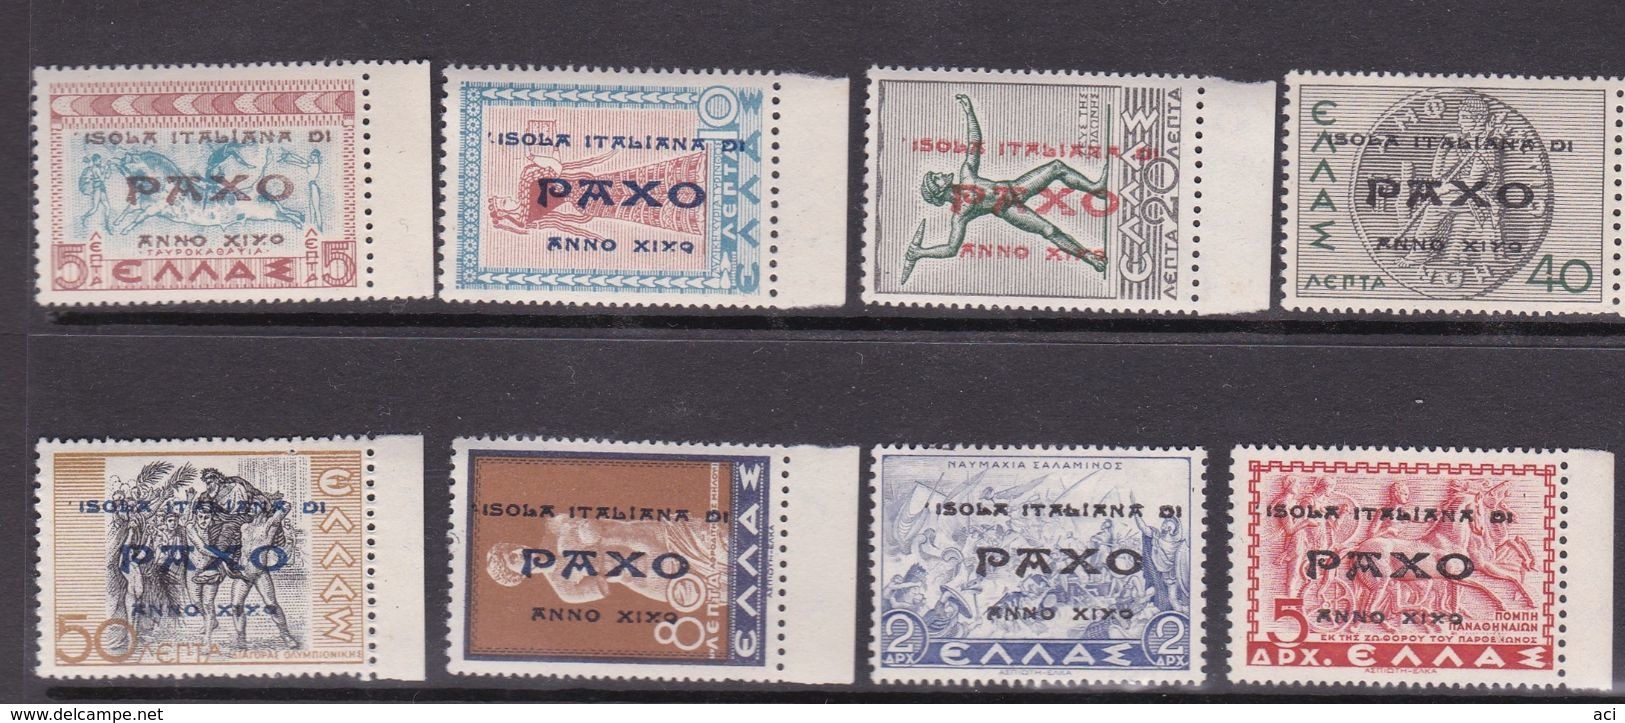 Italy-WW II Occupation-Isole Ionie, Paxos S 1-8 1942 Greek Stamps Overprinted, MNH - Ionische Inseln